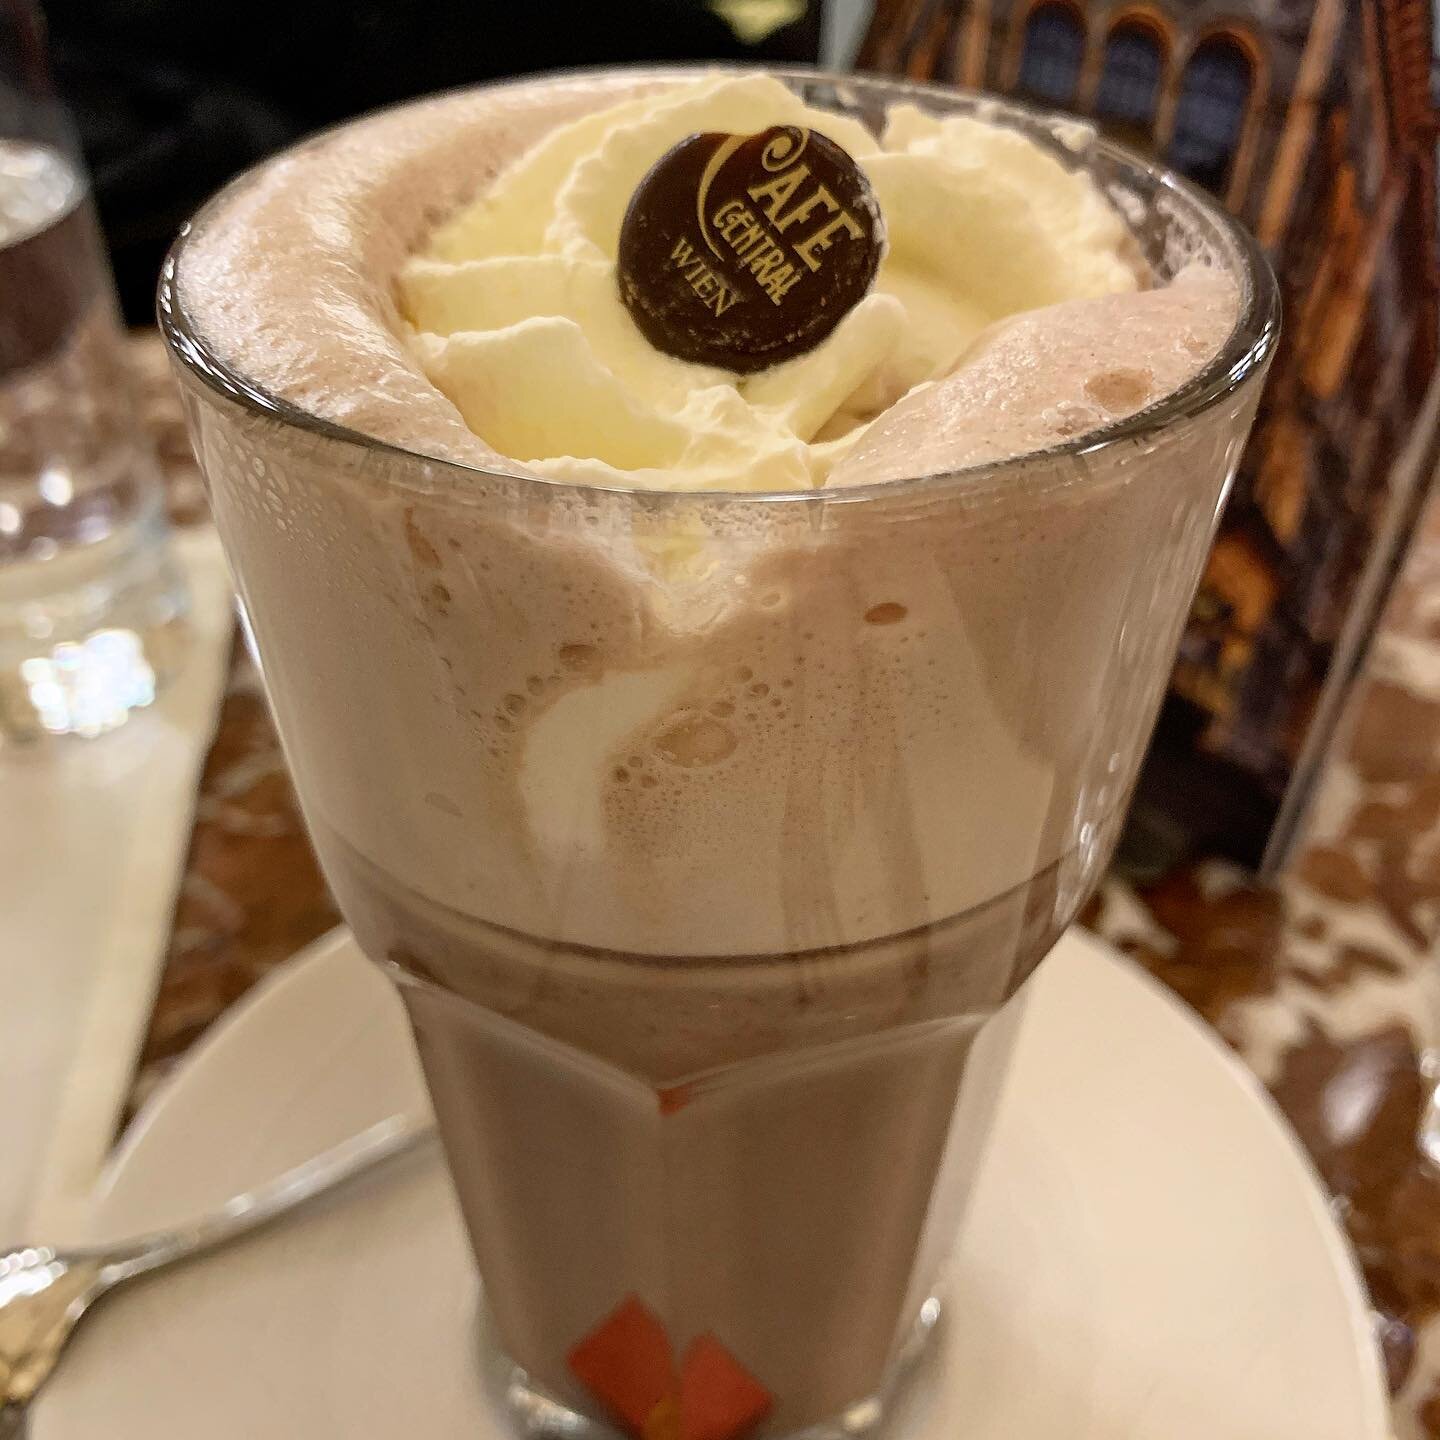 Memories of Christmas 2019 🎄Really craving an Amaretto Hot Chocolate and Chicken Schnitzel from Cafe Central @cafecentralwien ☕️🇦🇹
On our future return to the wonderfully historic Austrian capital, you&rsquo;ll be our first stop. Best service in V